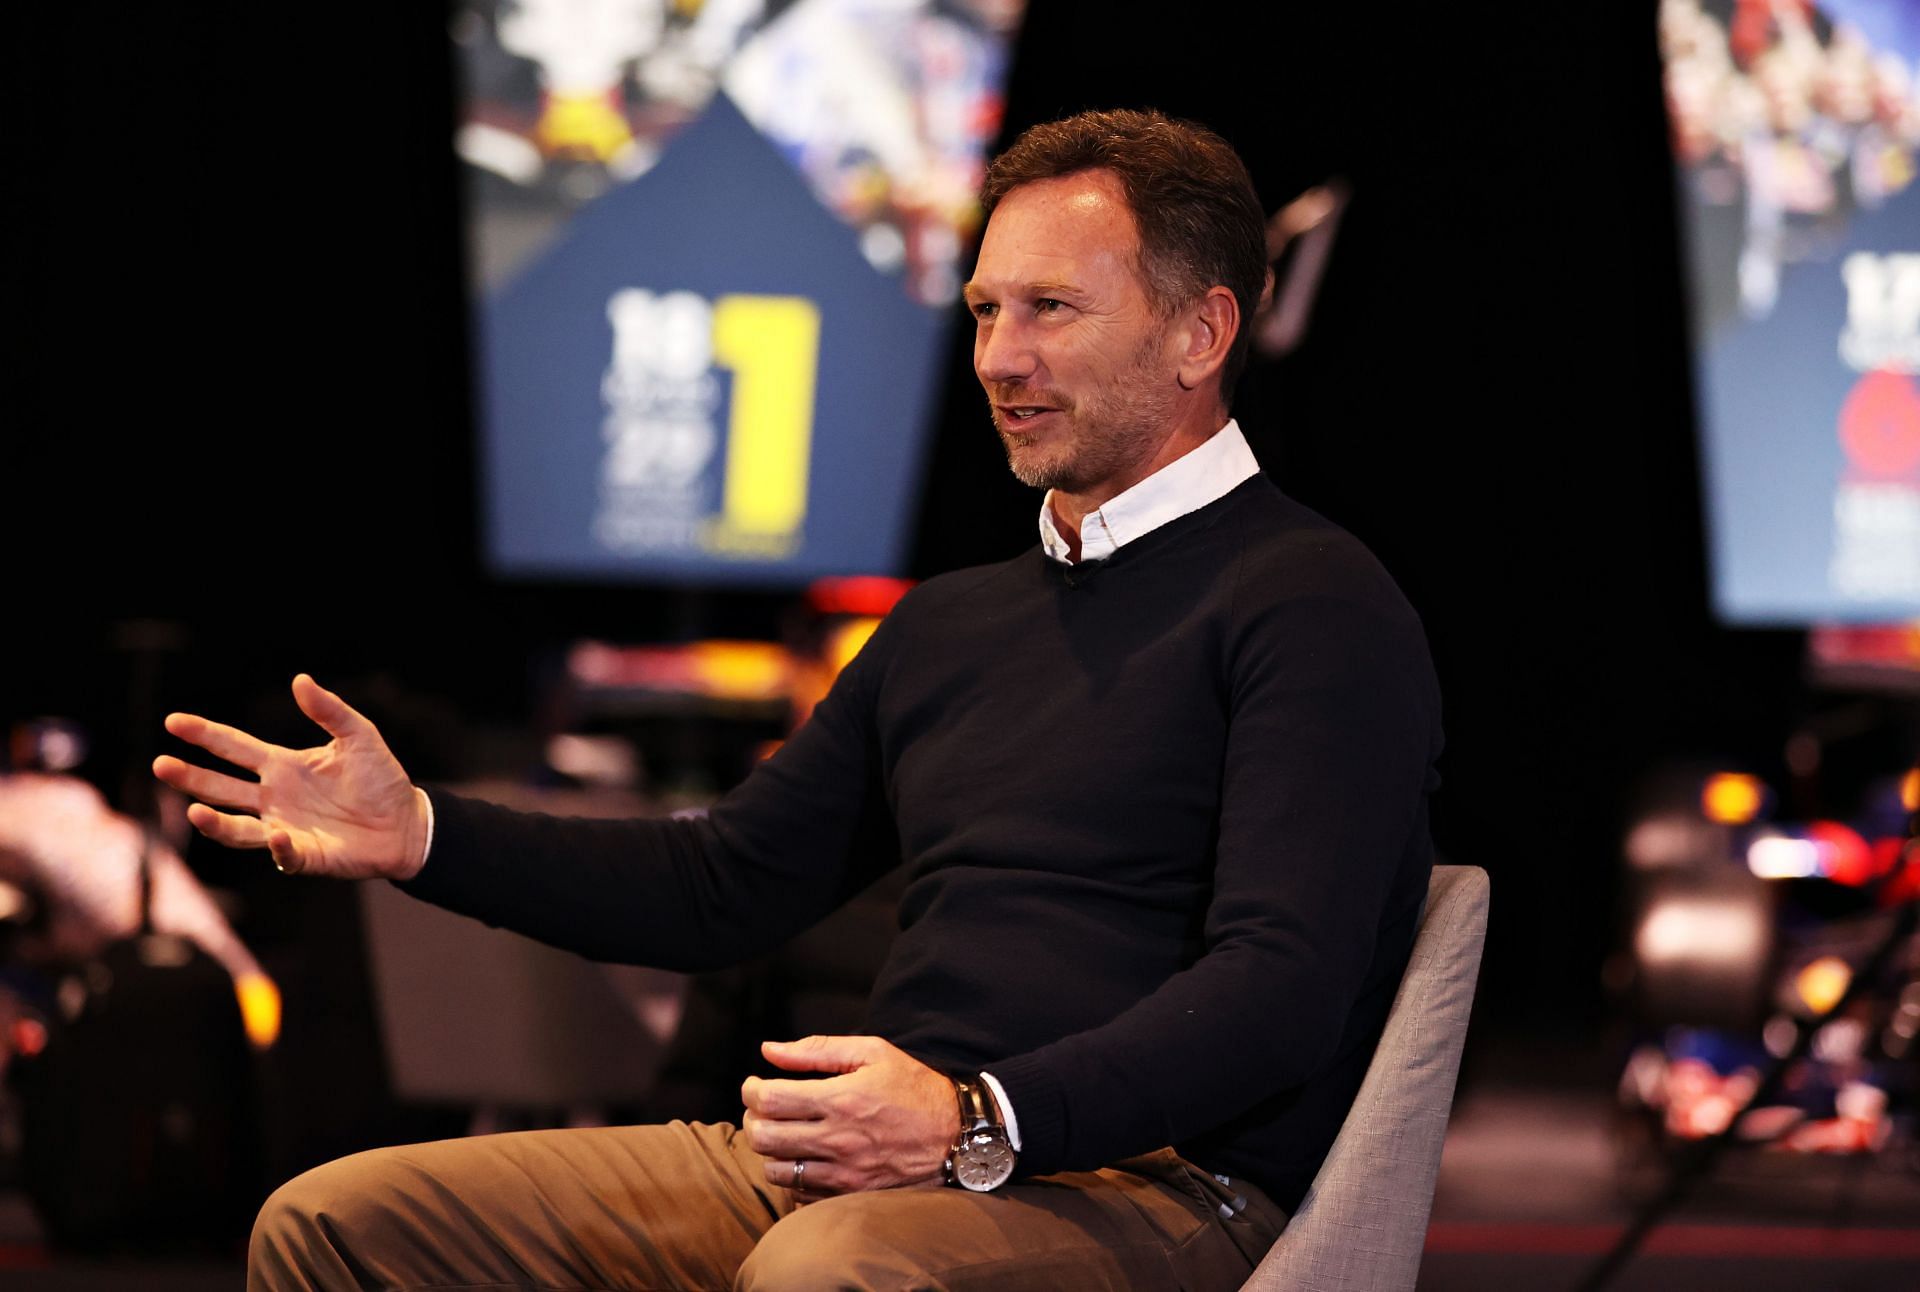 Red Bull F1 team principal Christian Horner at the Red Bull Racing Factory